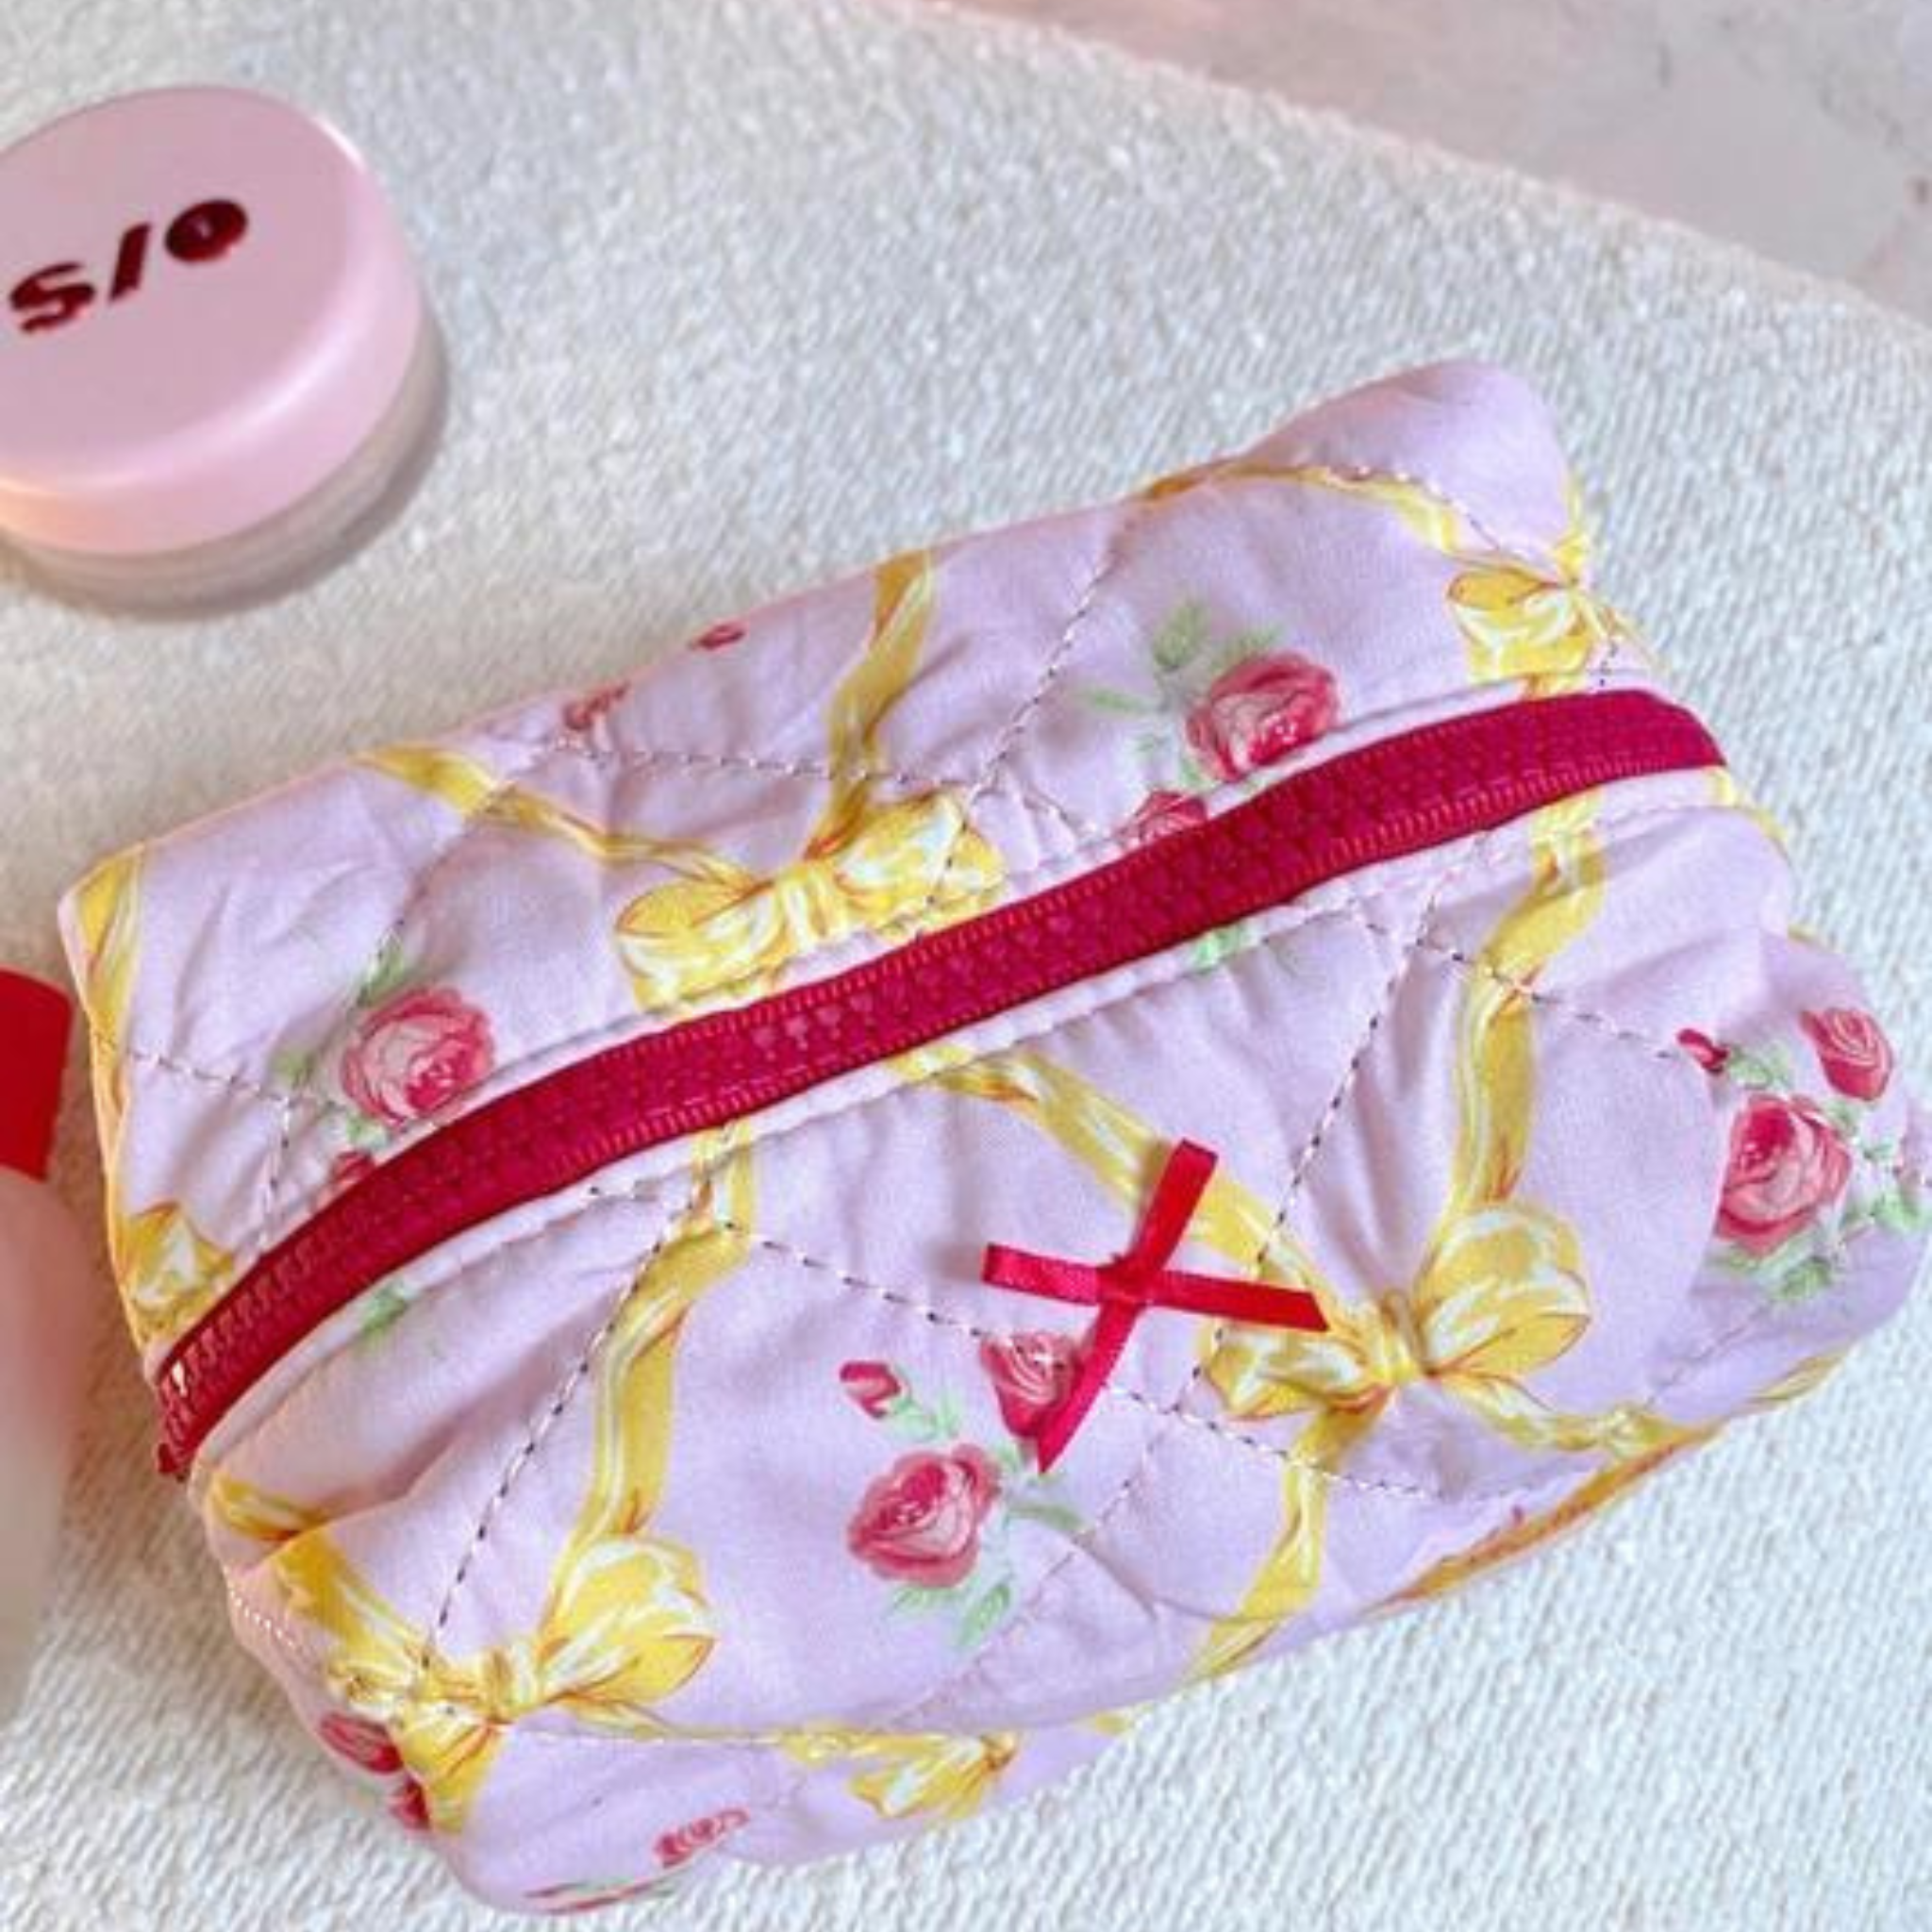 Bow and Flower Small Red Makeup Bag